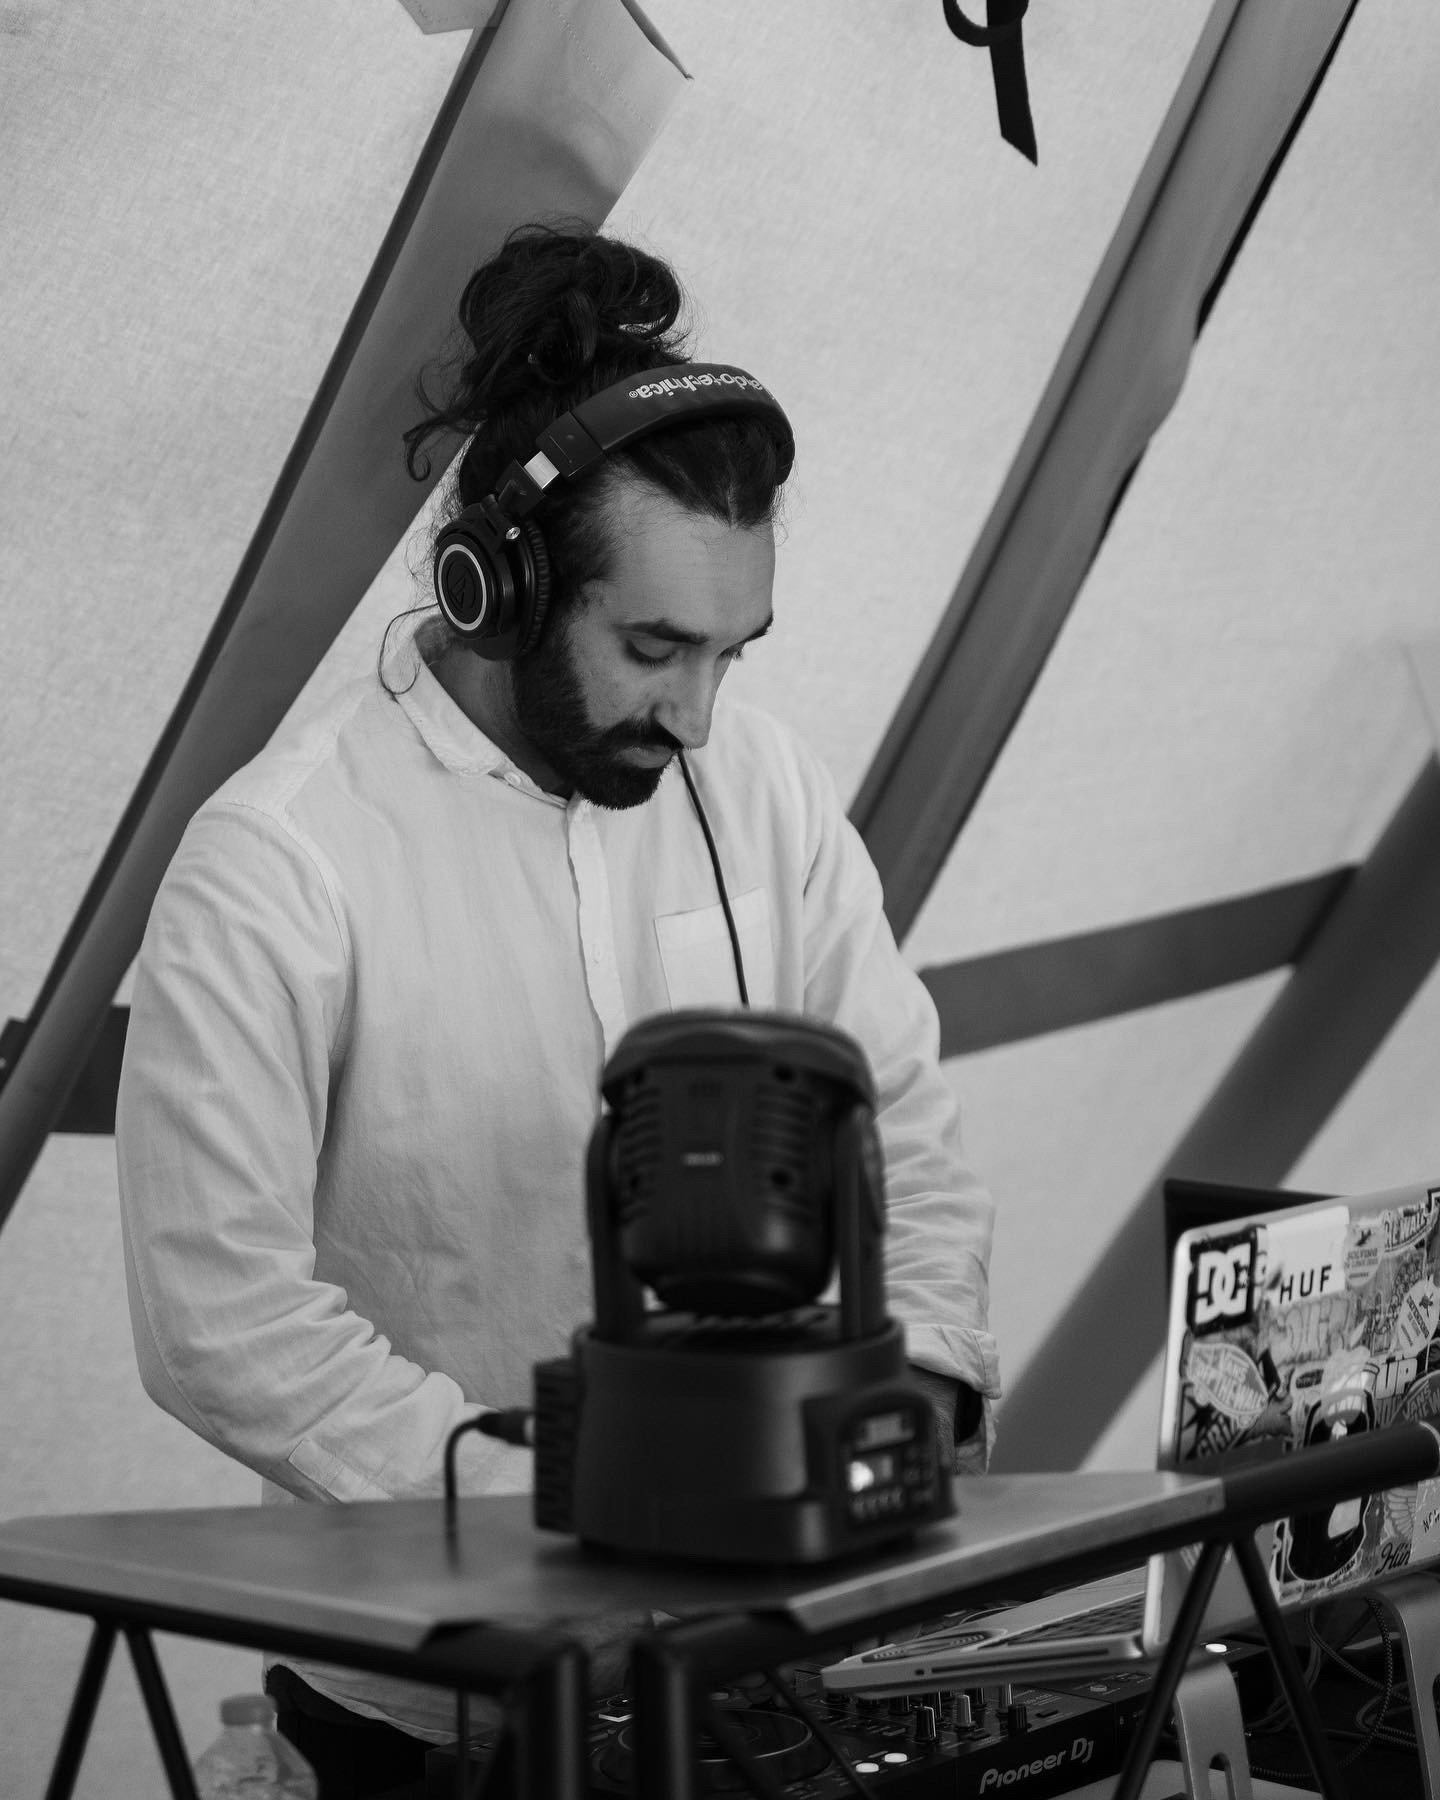  A black and white photo of a dark-haired man with his hair in a bun who is wearing headphones and appears to be djing. 